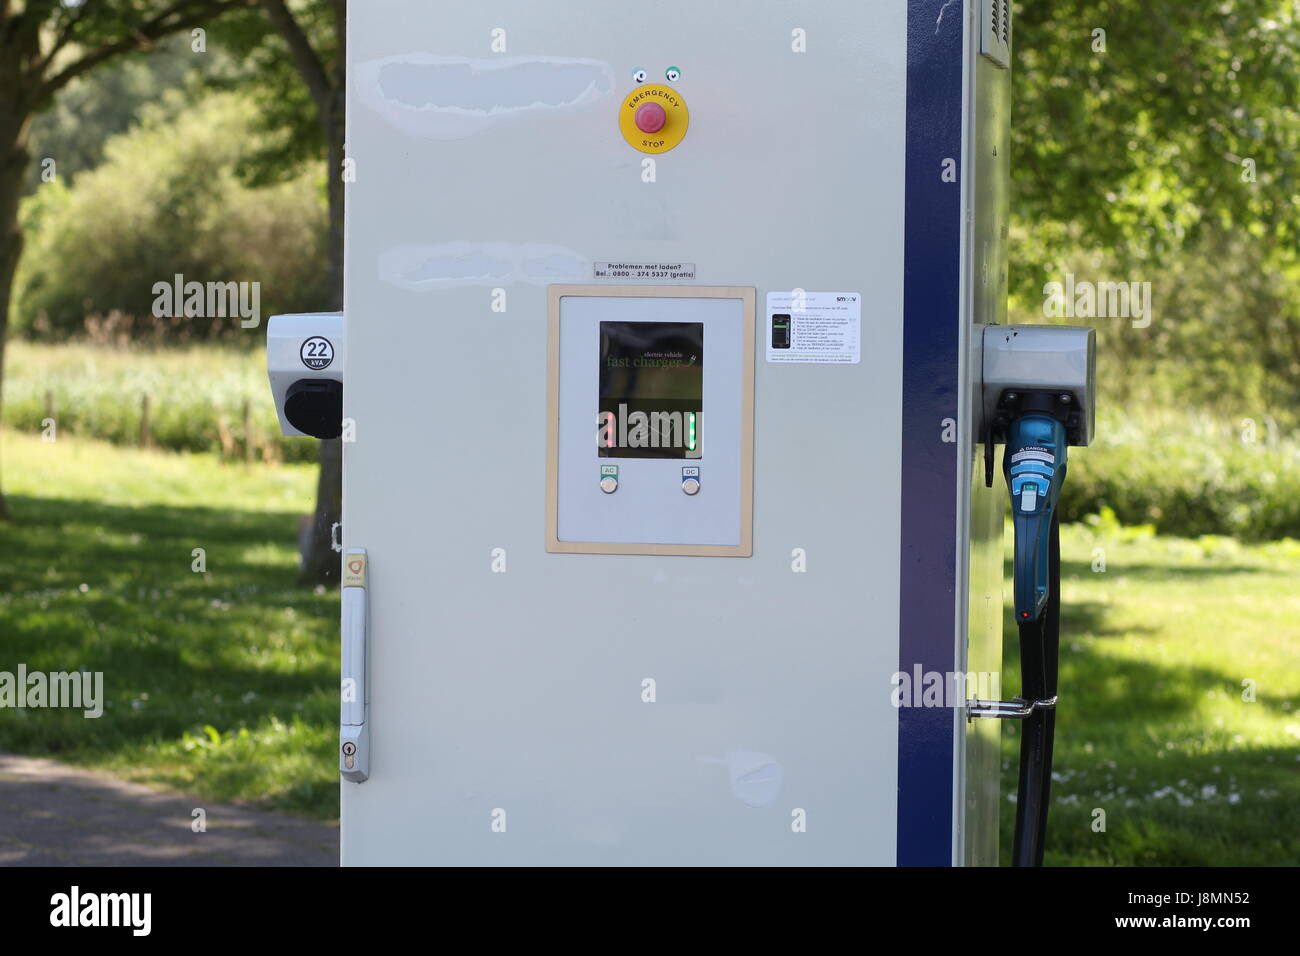 Electric vehicle charging station in the Netherlands. Stock Photo